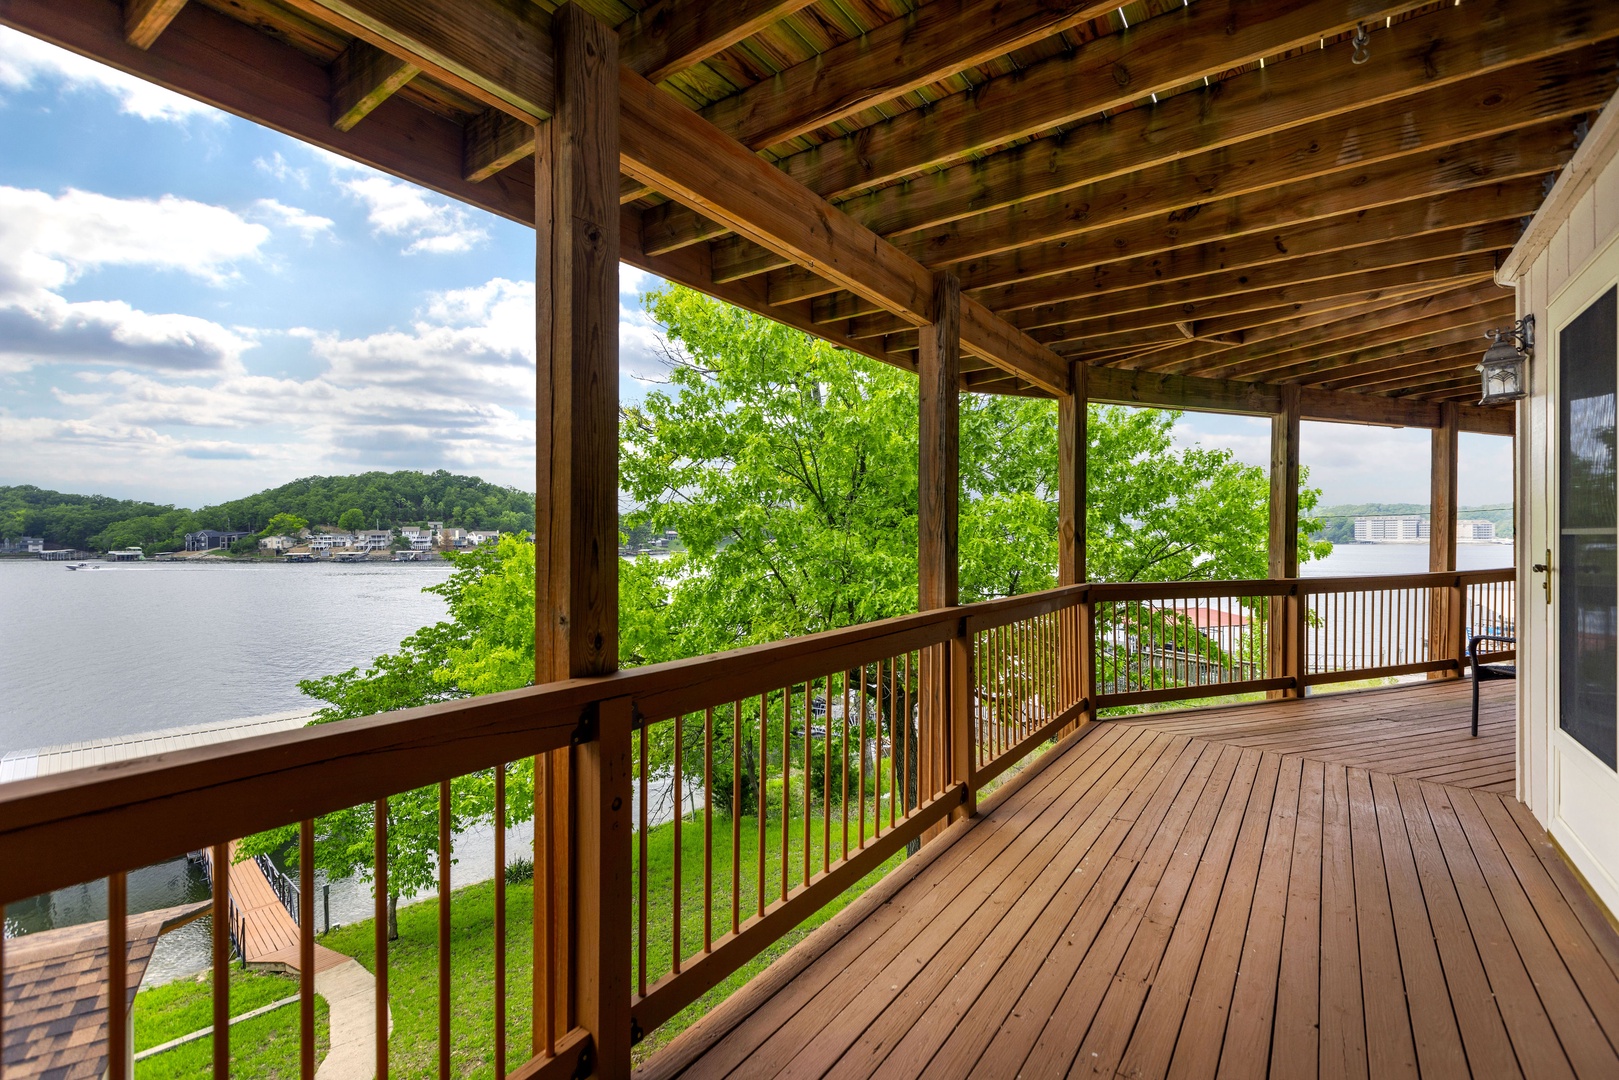 Discover expansive lower-level deck space, perfect for relaxation and entertaining alike